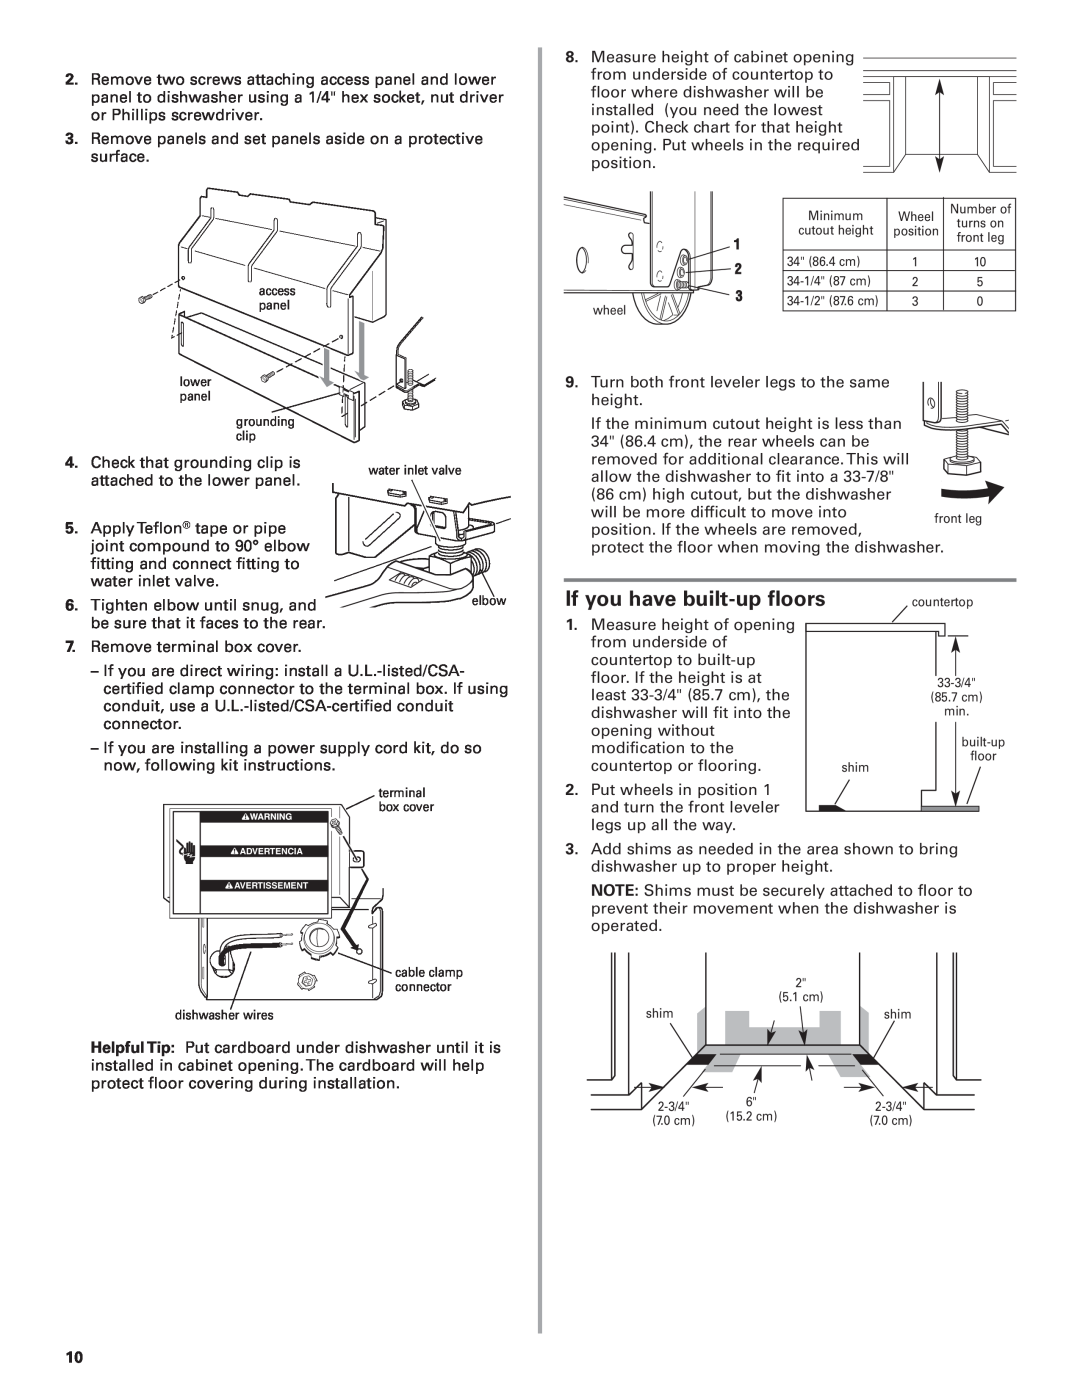 KitchenAid 8573157 installation instructions If you have built-up floors 